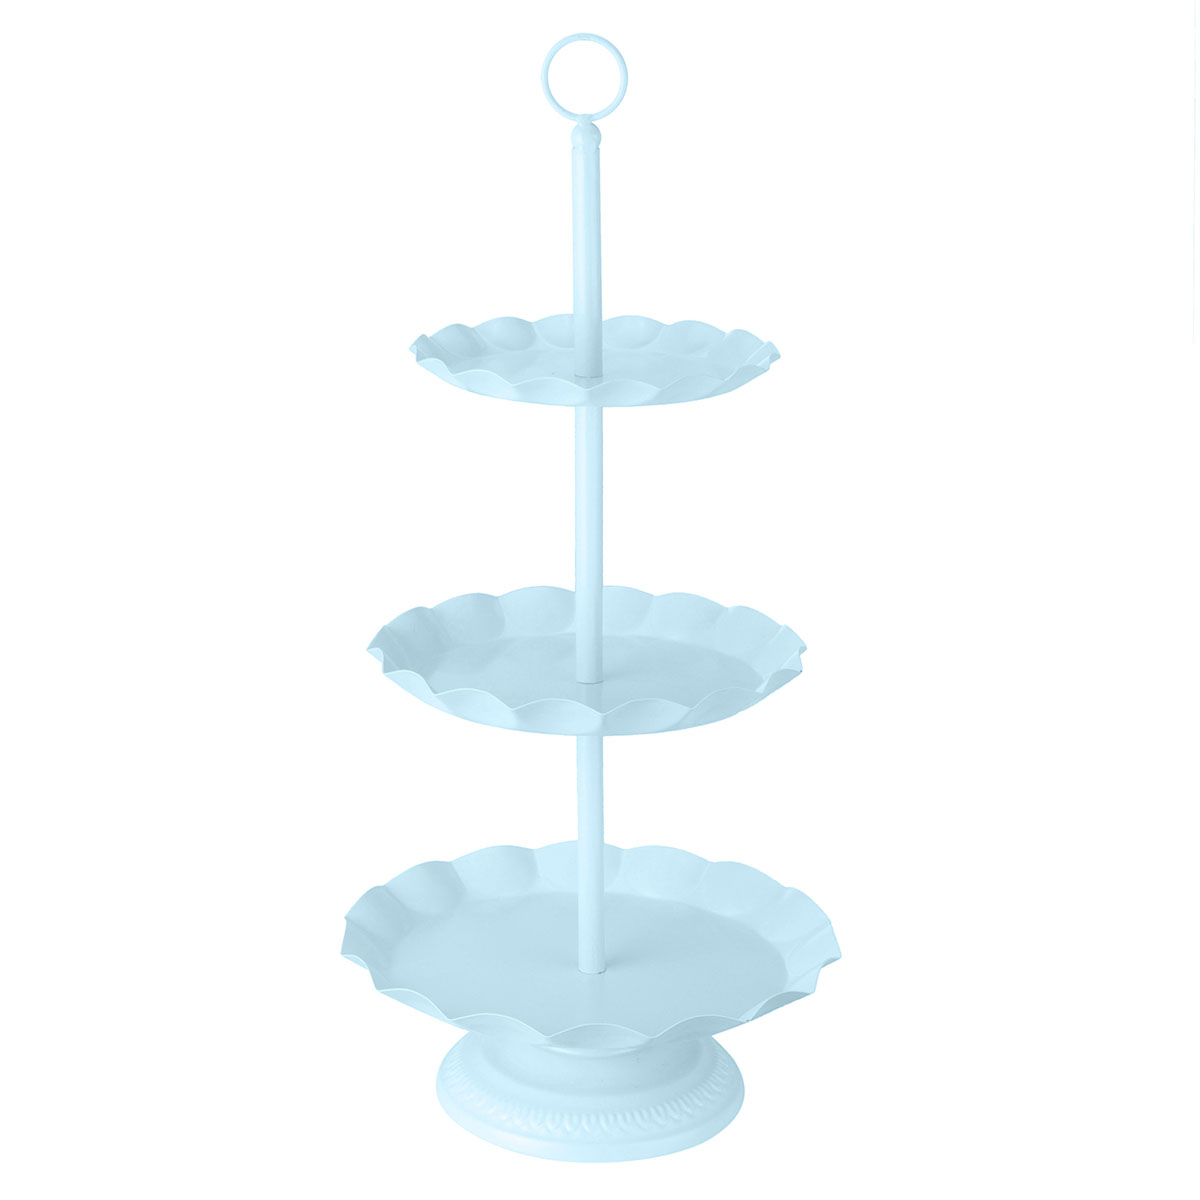 2--3-Ters-Blue-Cake-Holder-Cupcake-Stand-Birthday-Wedding-Party-Display-Holder-Decorations-1340743-8